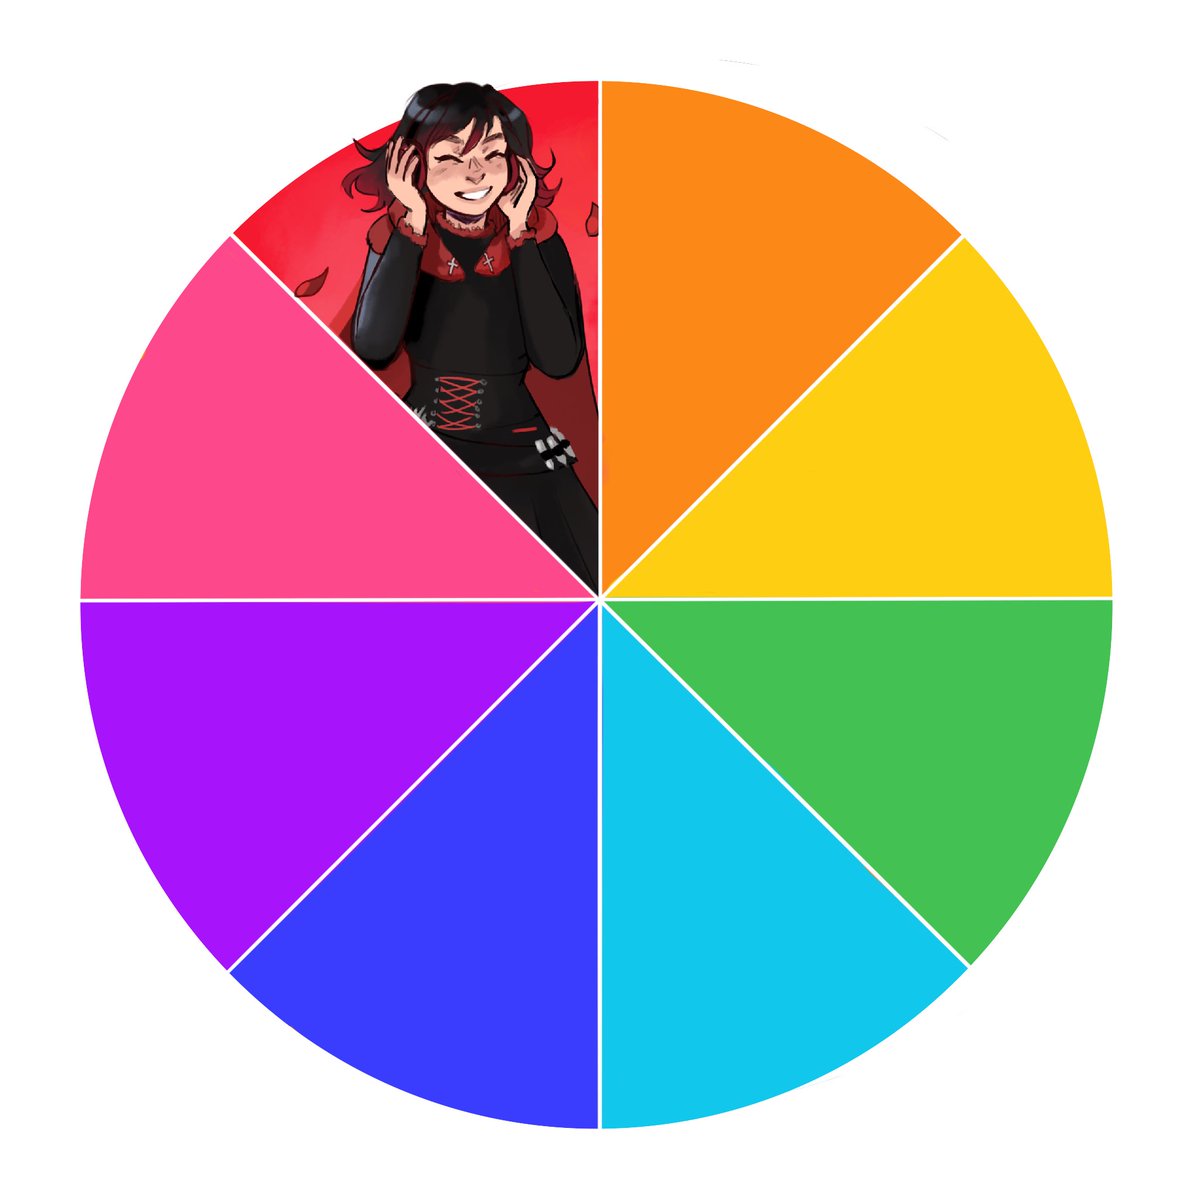 #RWBY colour wheel challenge part 1!
Red for Ruby 🥀